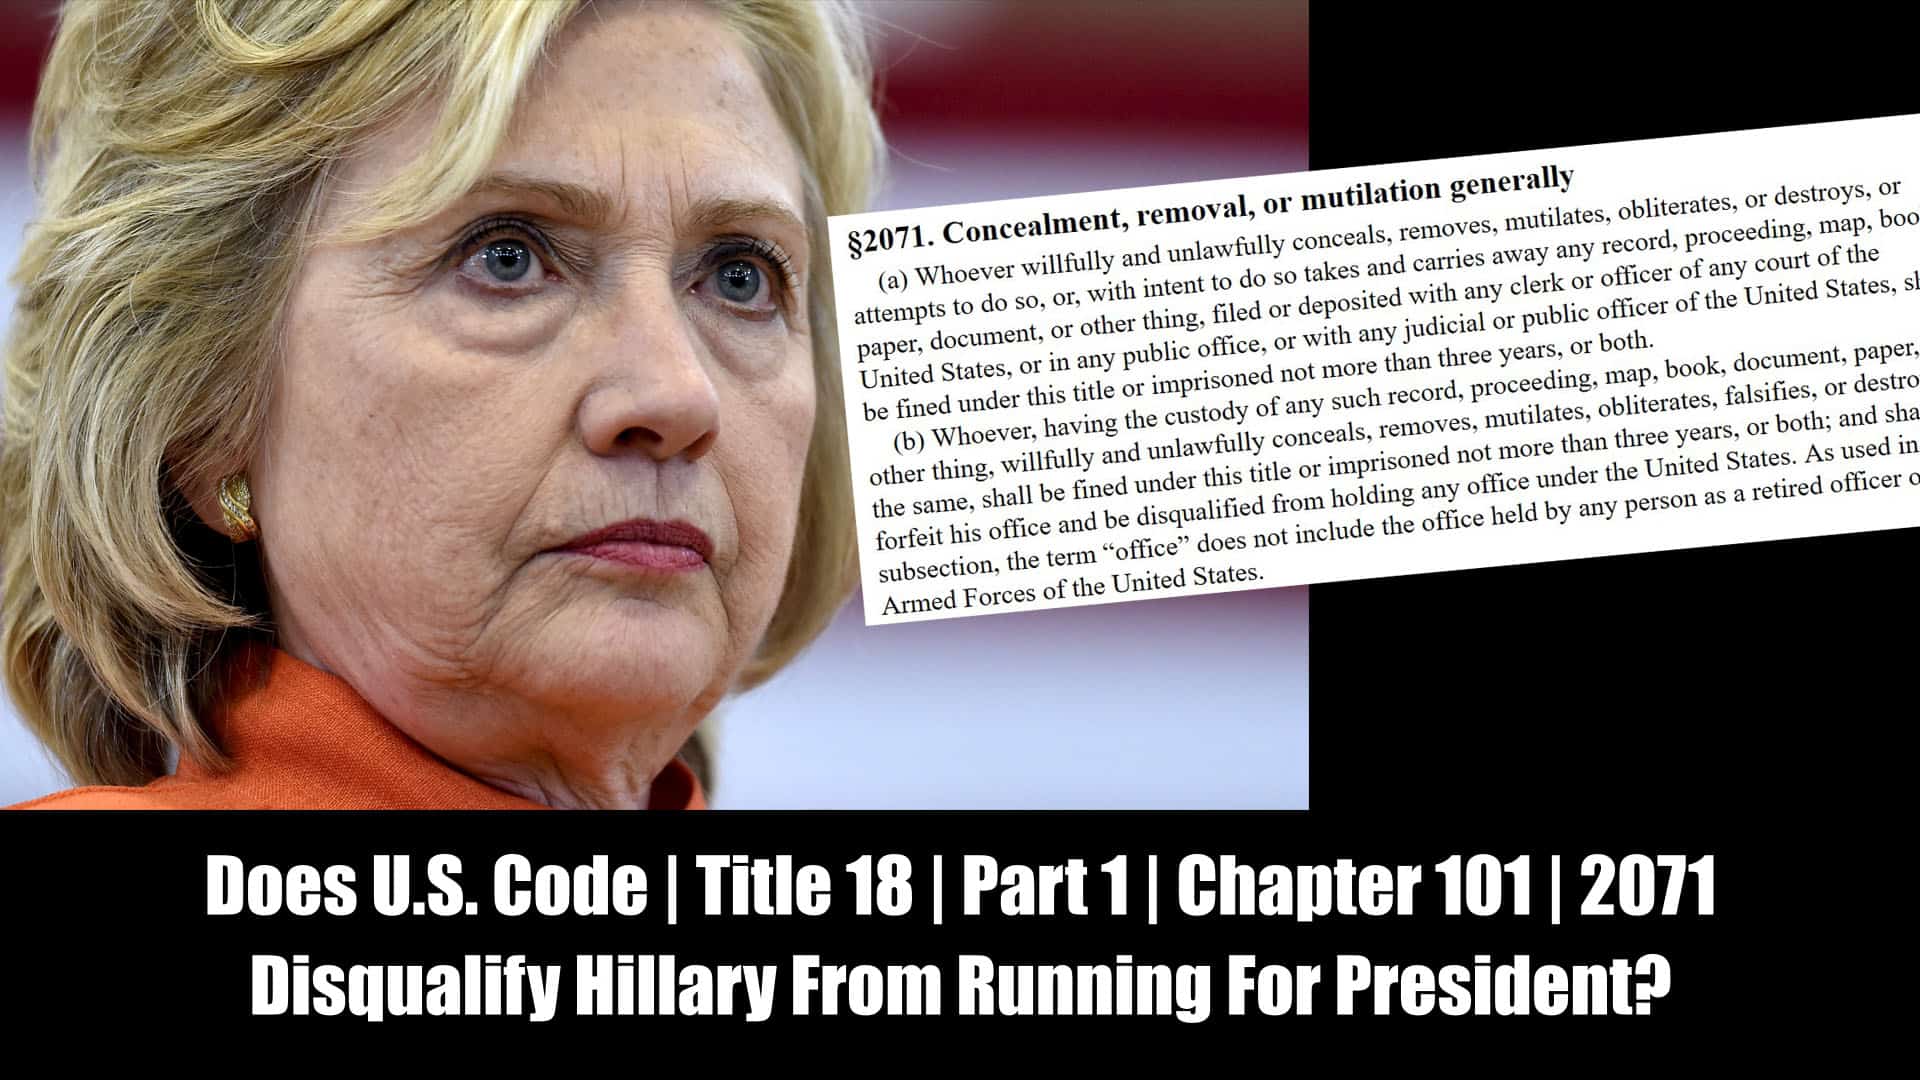 Does U.S. Code | Title 18 | Part 1 | Chapter 101 | 2071 Disqualify Hillary Clinton From Running For President?